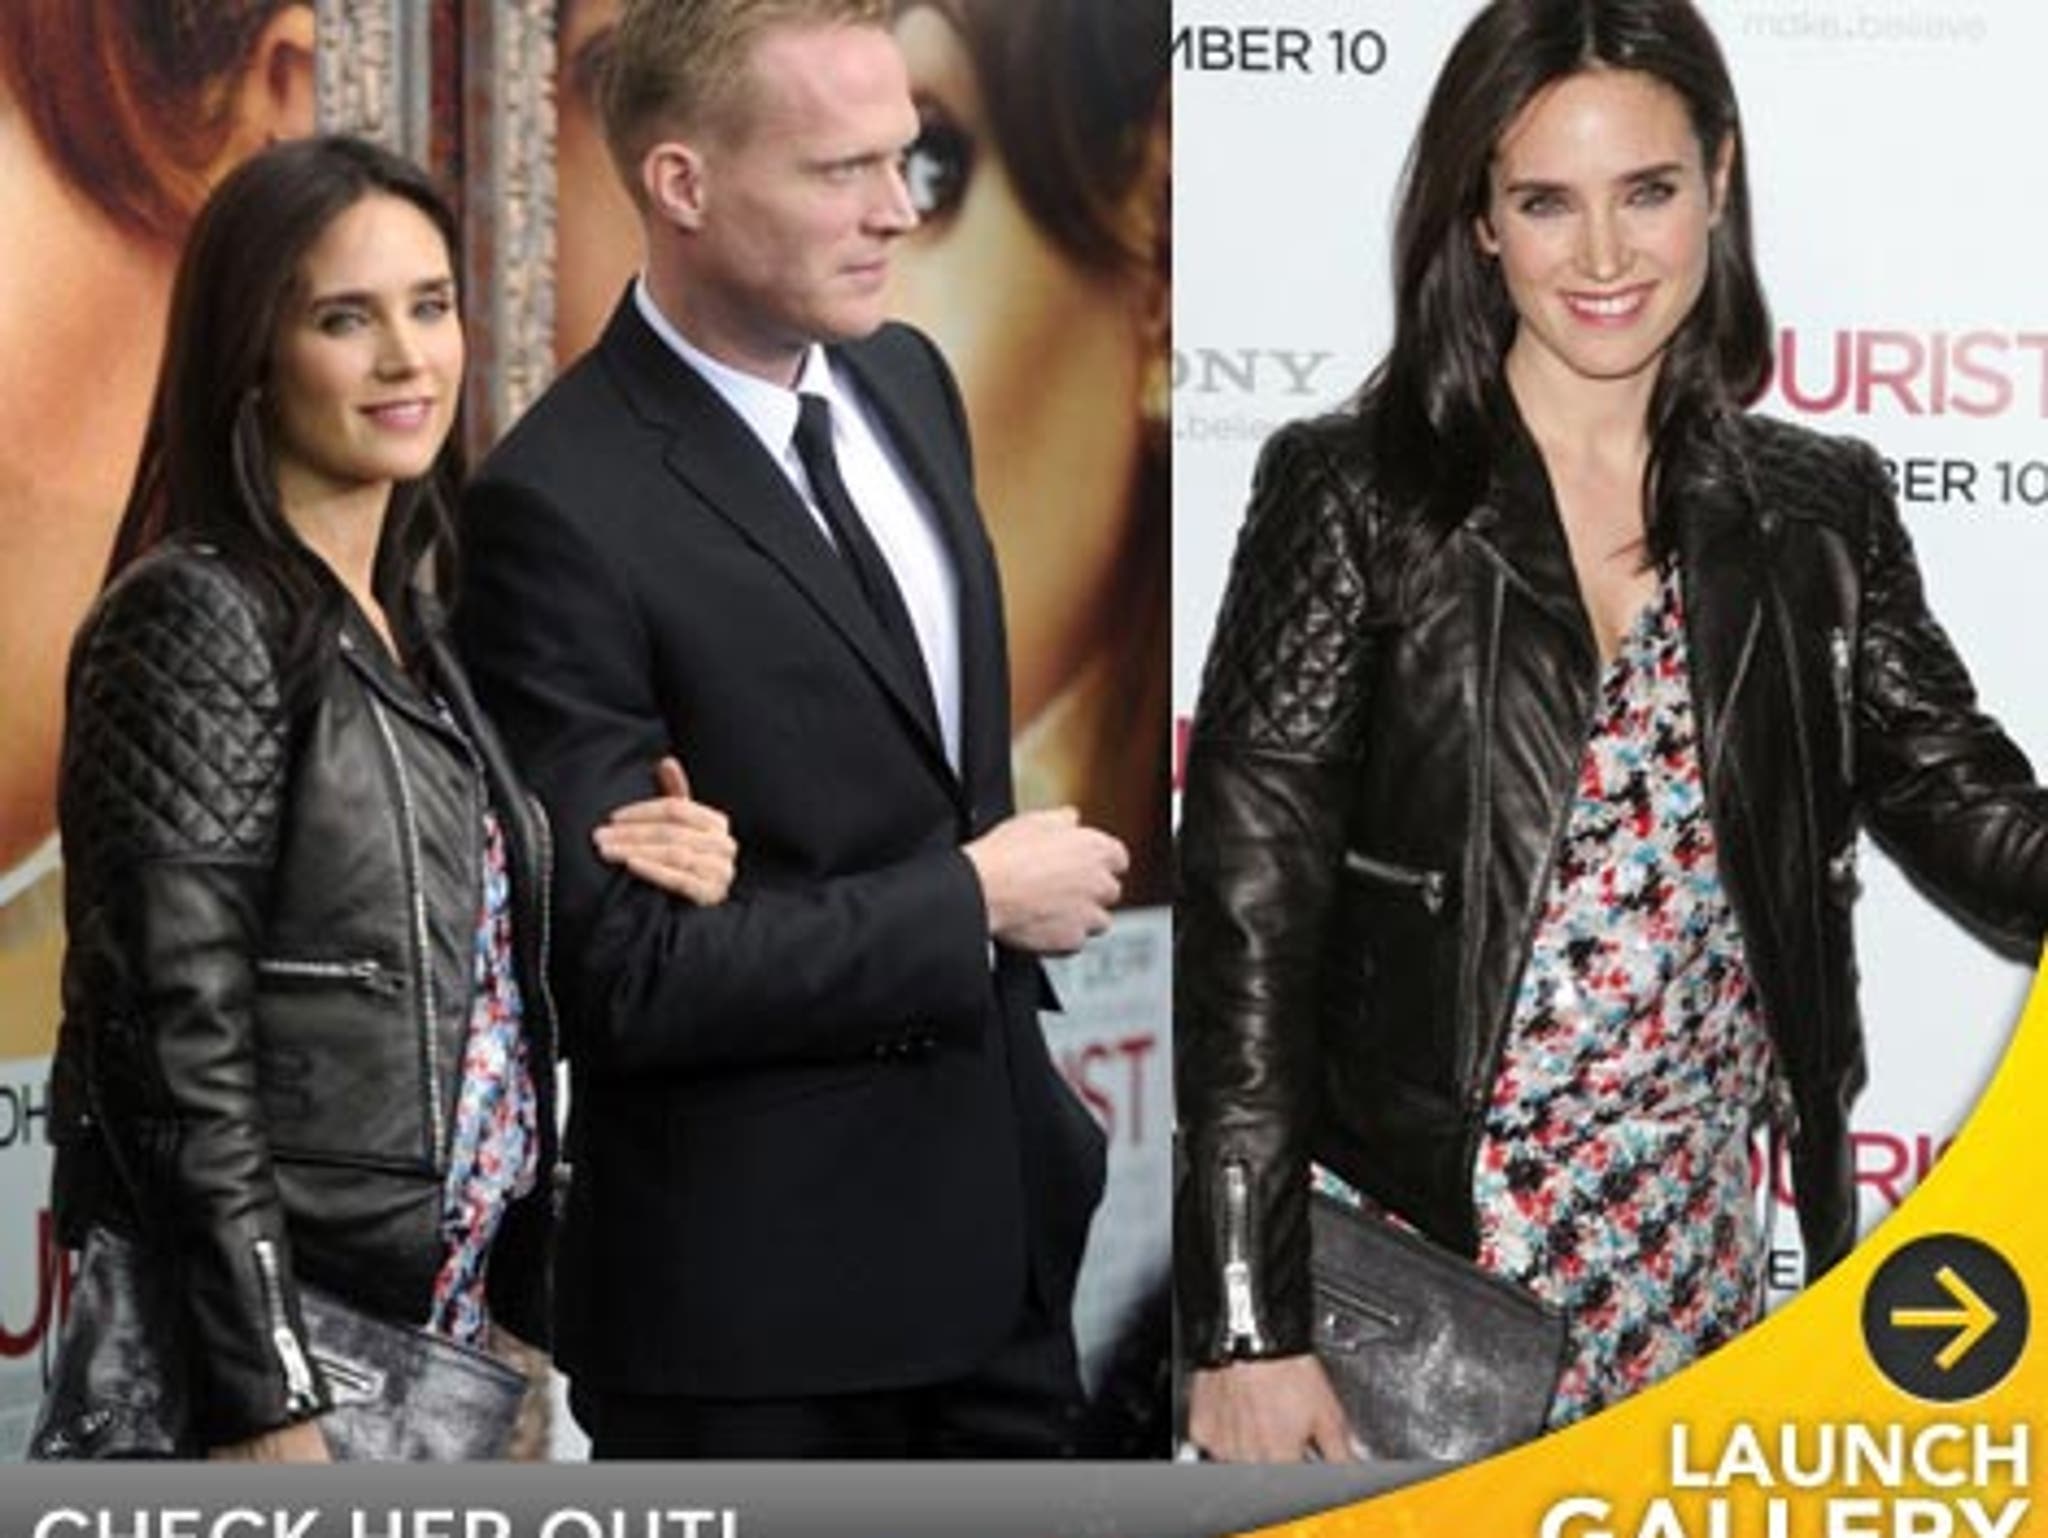 Jennifer Connelly and family in NY + with added Paul Bettany!